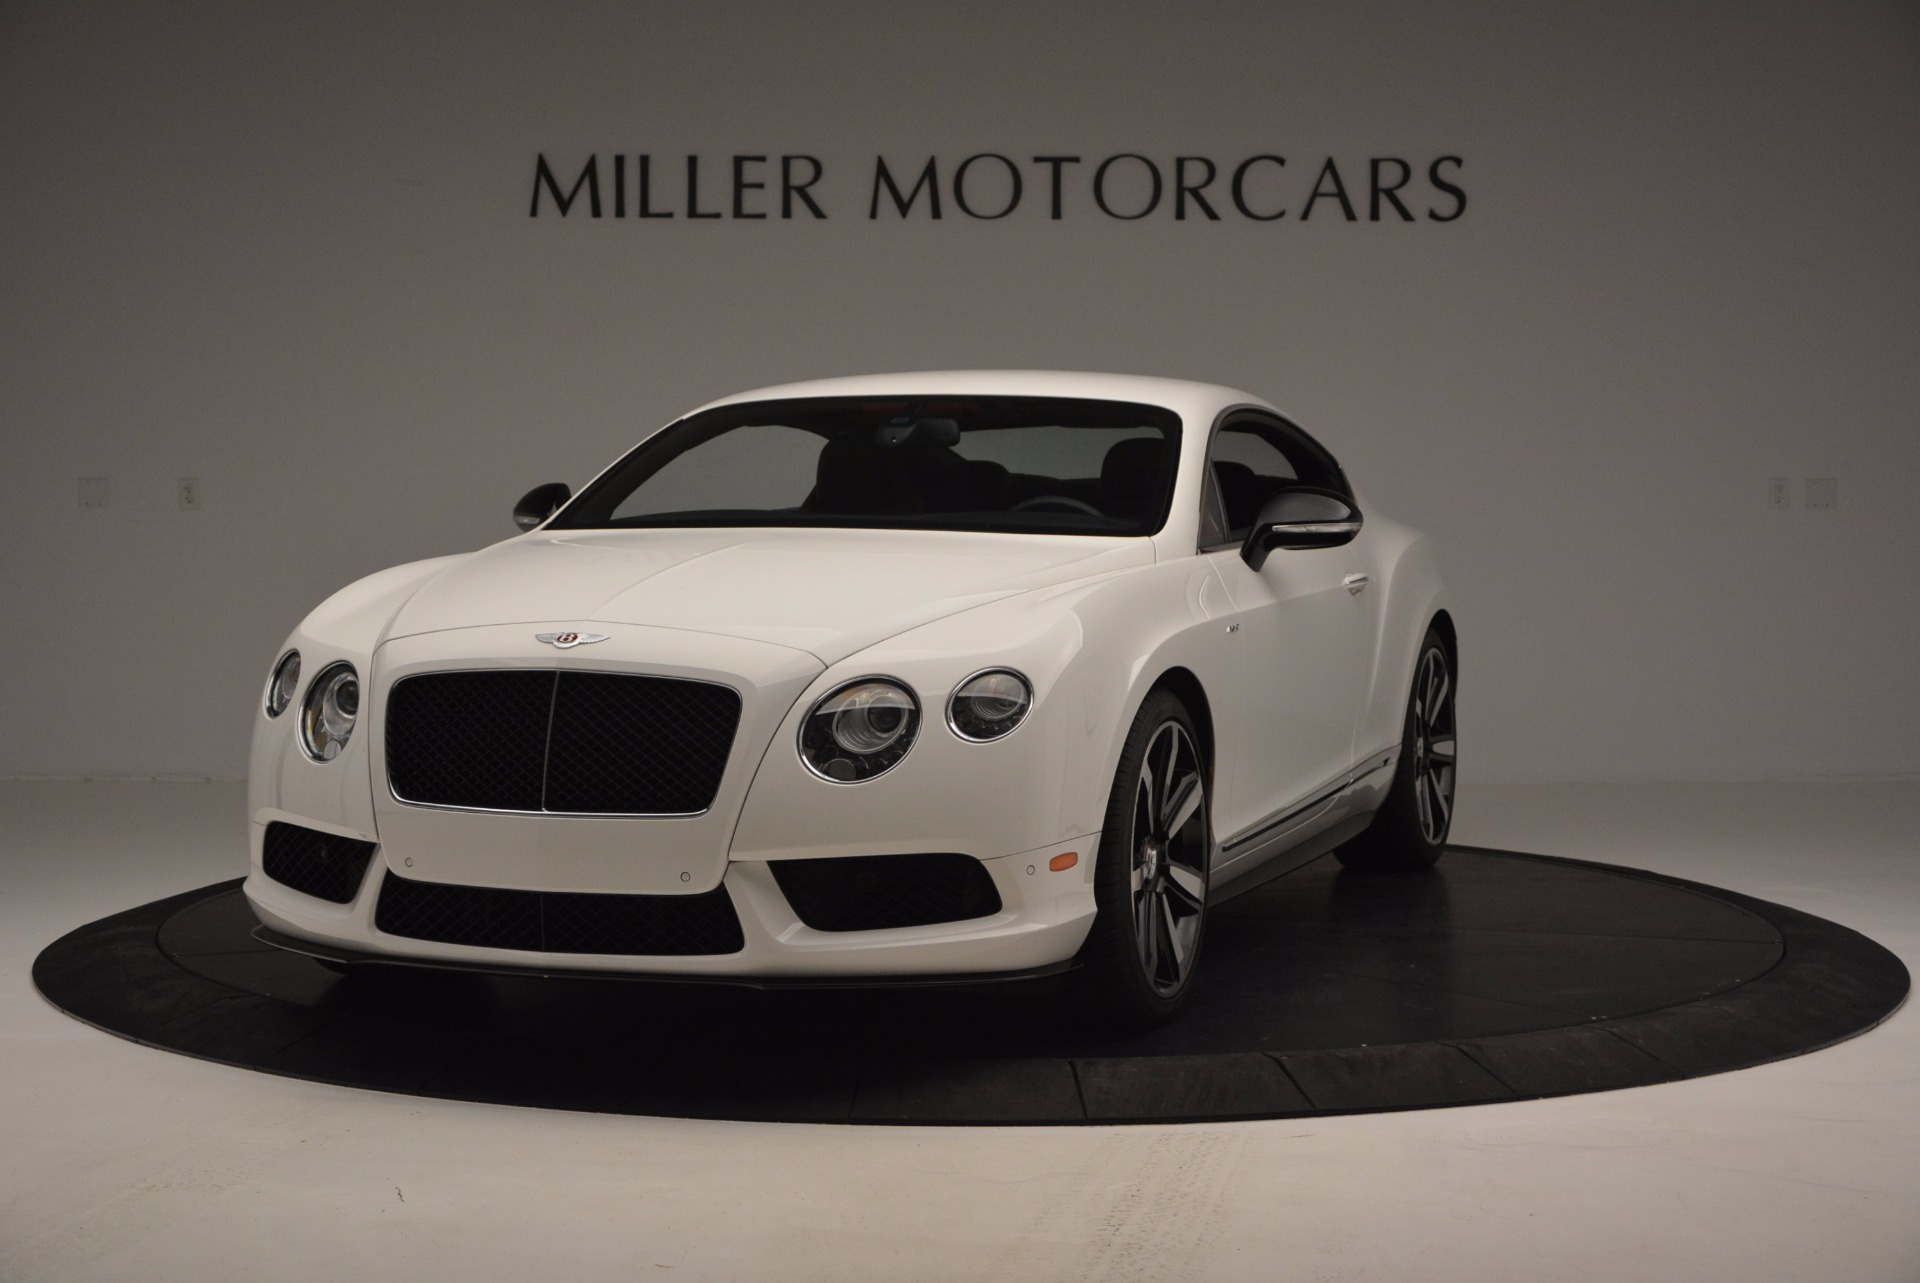 Used 2014 Bentley Continental GT V8 S for sale Sold at Maserati of Westport in Westport CT 06880 1